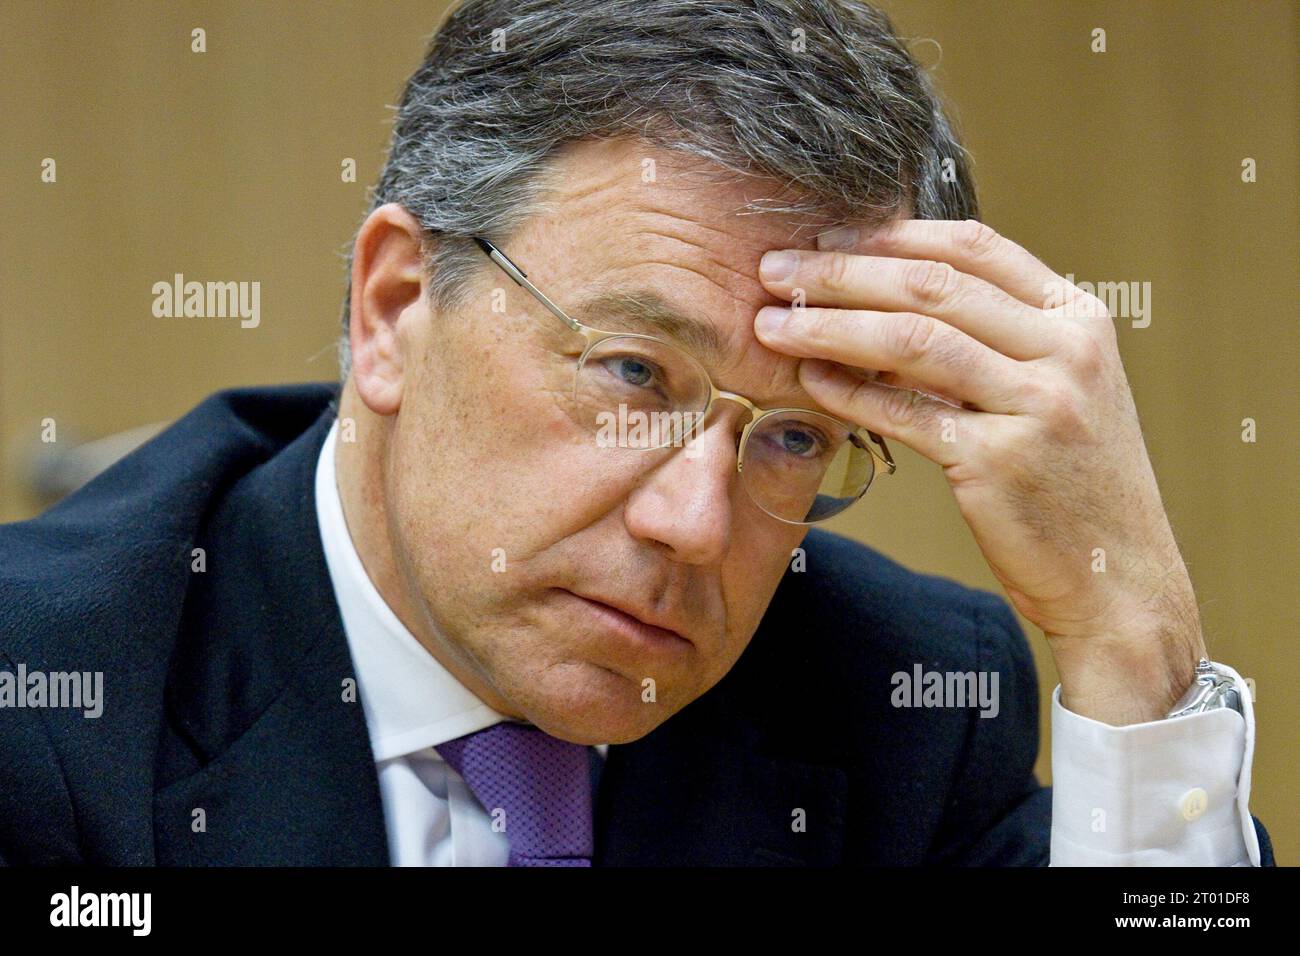 JEAN PIERRE THOMAS FRENCH POLITICIAN AND BUSINESS PERSON Stock Photo - Alamy